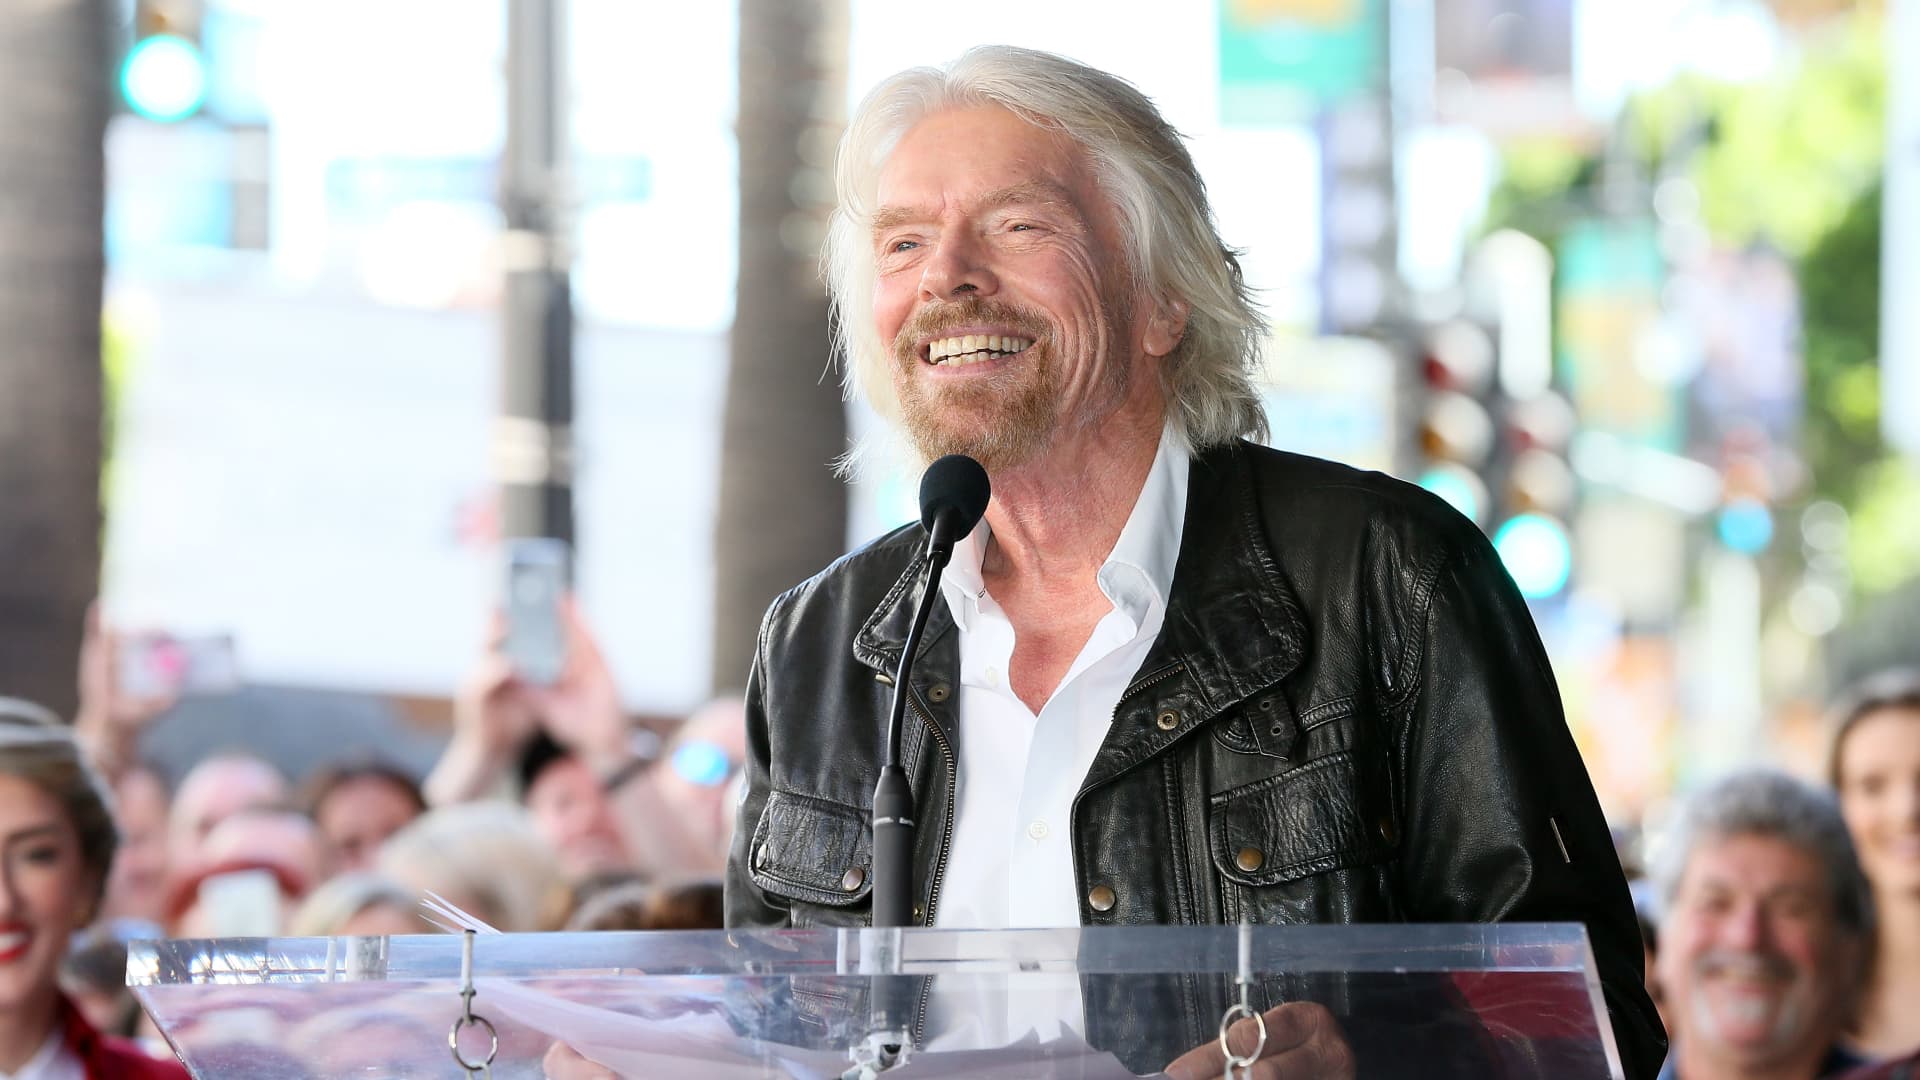 Richard Branson, Shaquille O'Neal, Daymond John and others reveal what they wish they knew at 25 years old